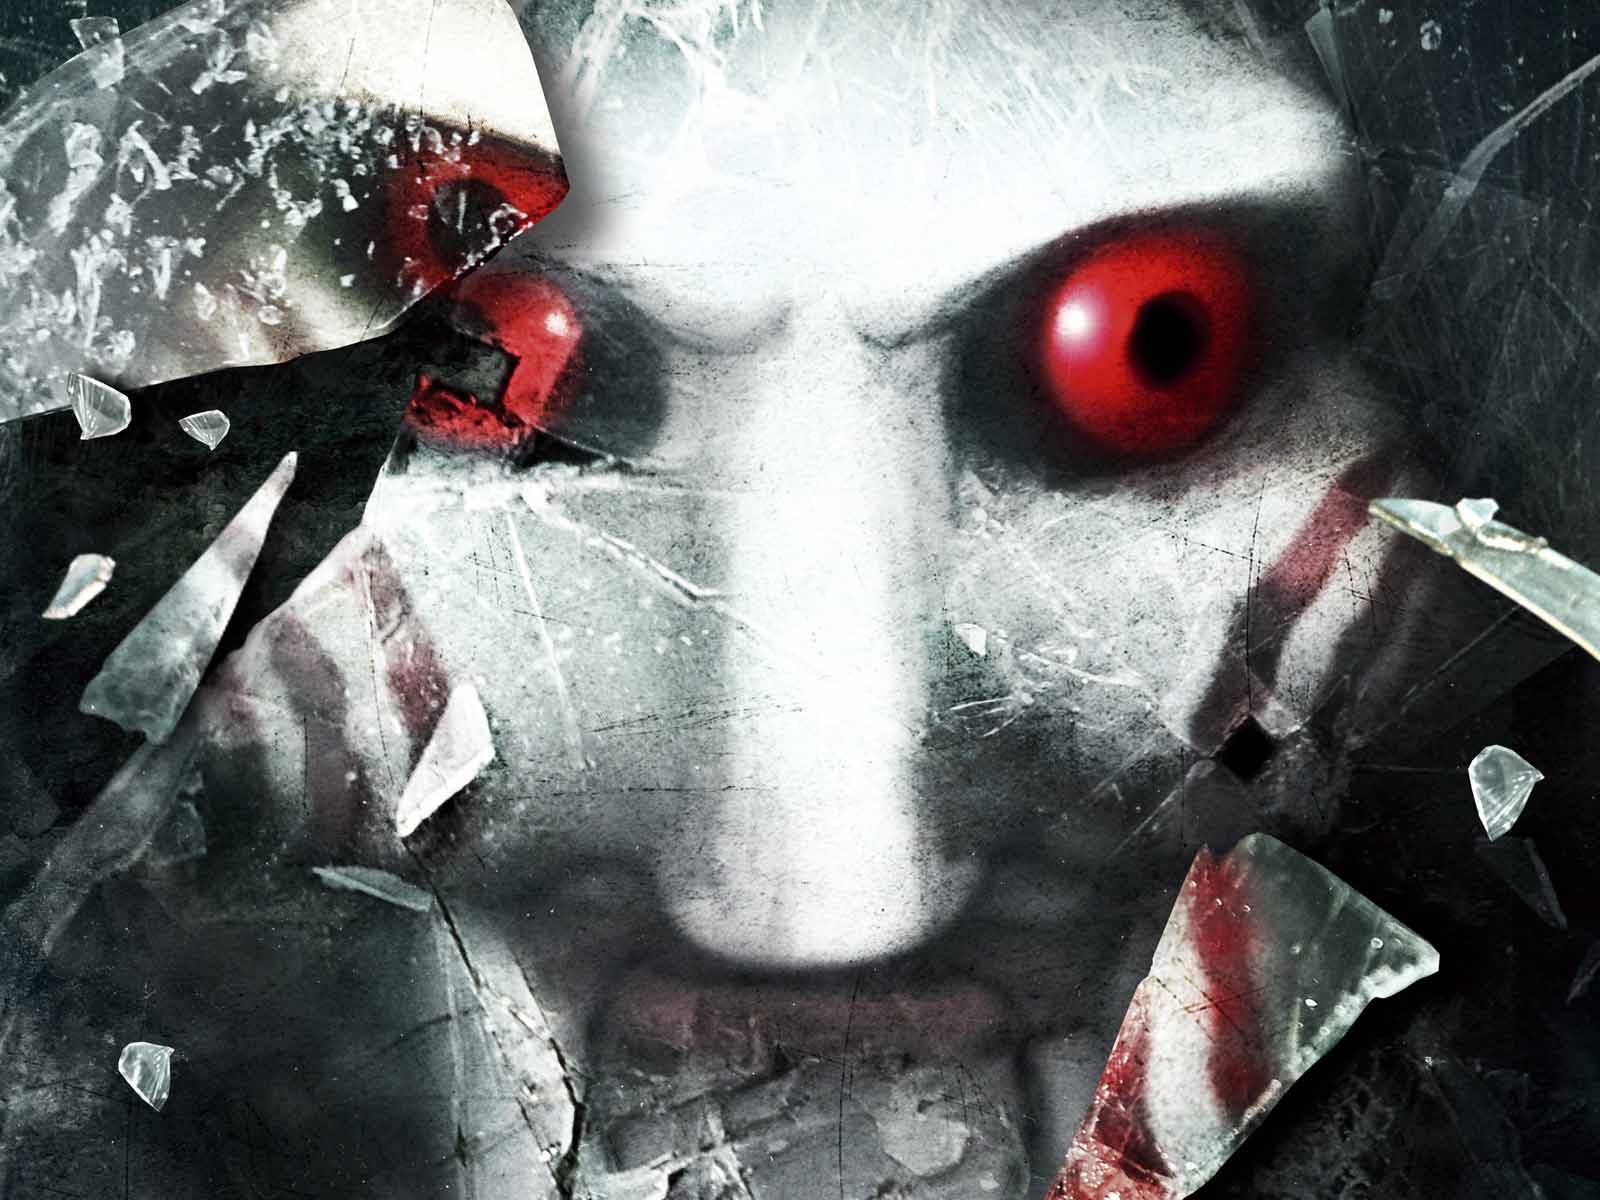 Saw Wallpapers